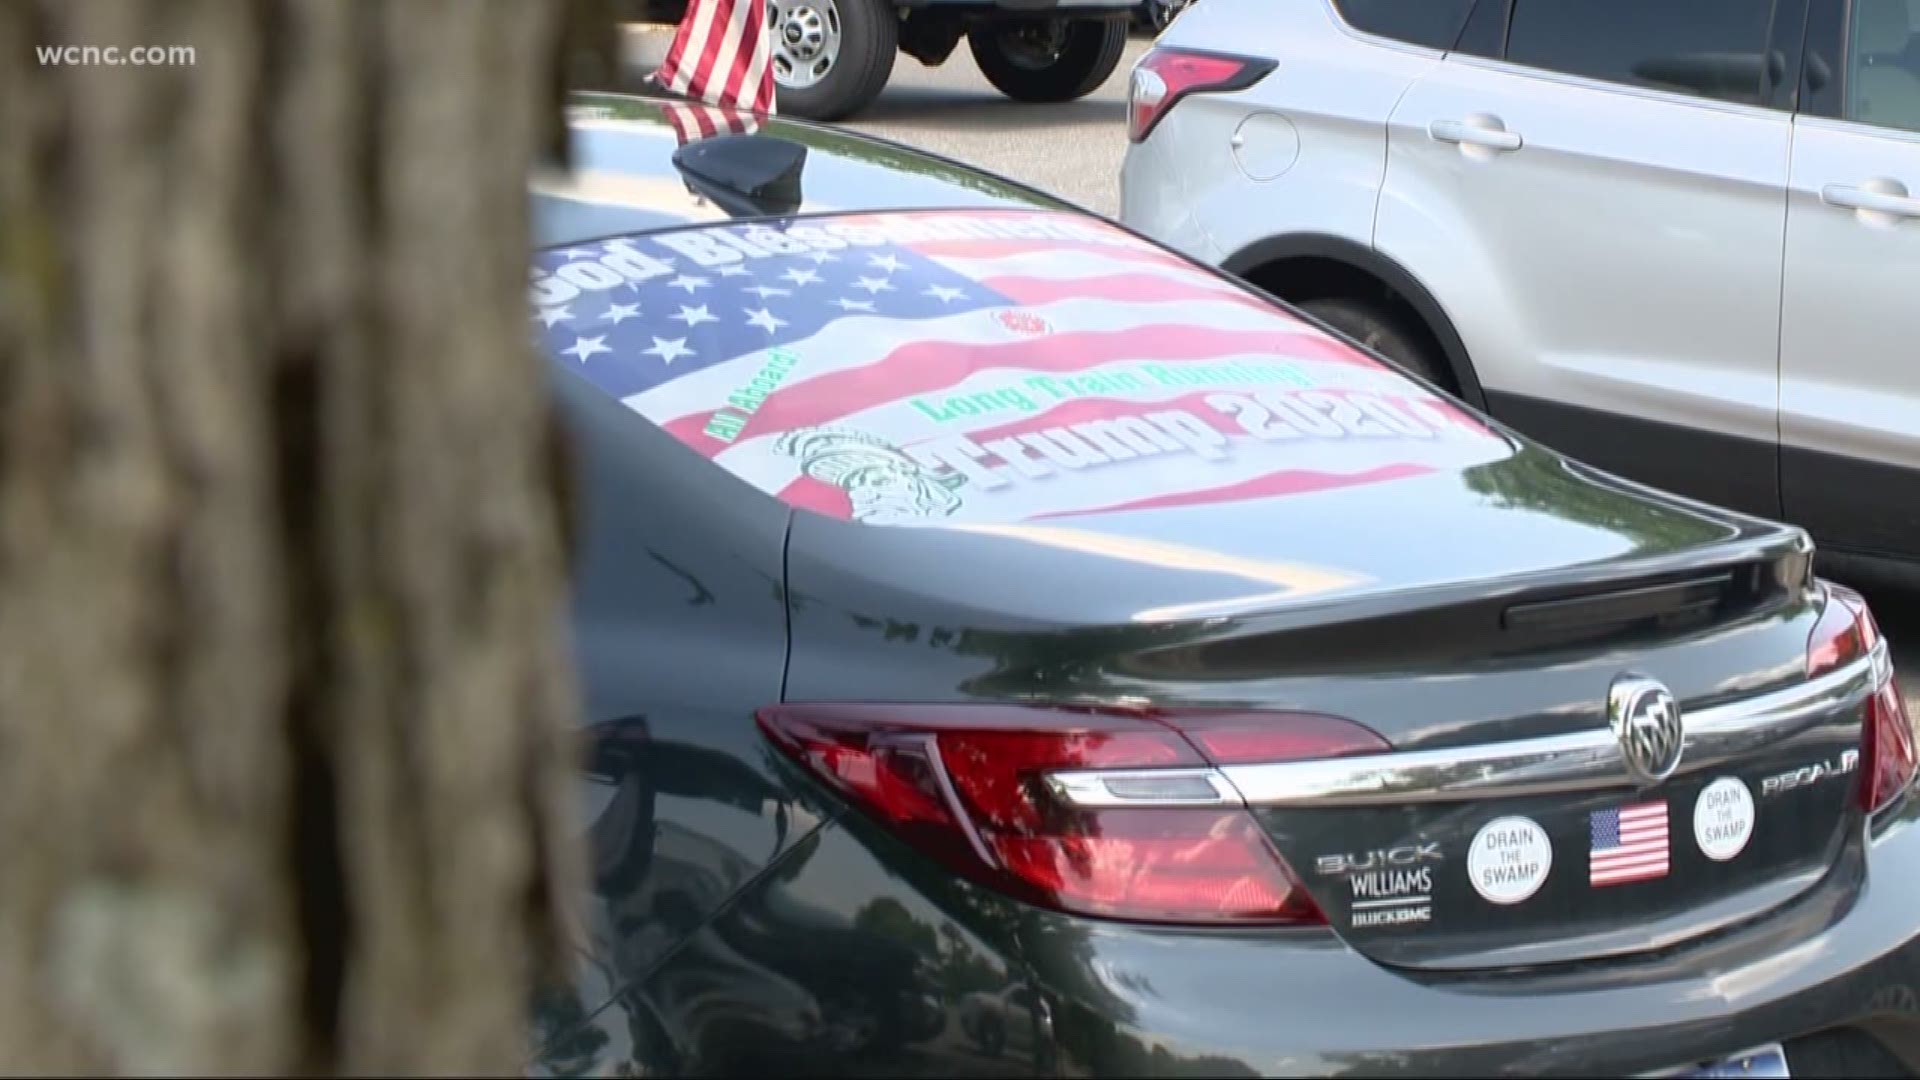 An Uber driver who was booted from the airport for having pro-Trump decals on his car is back in business.